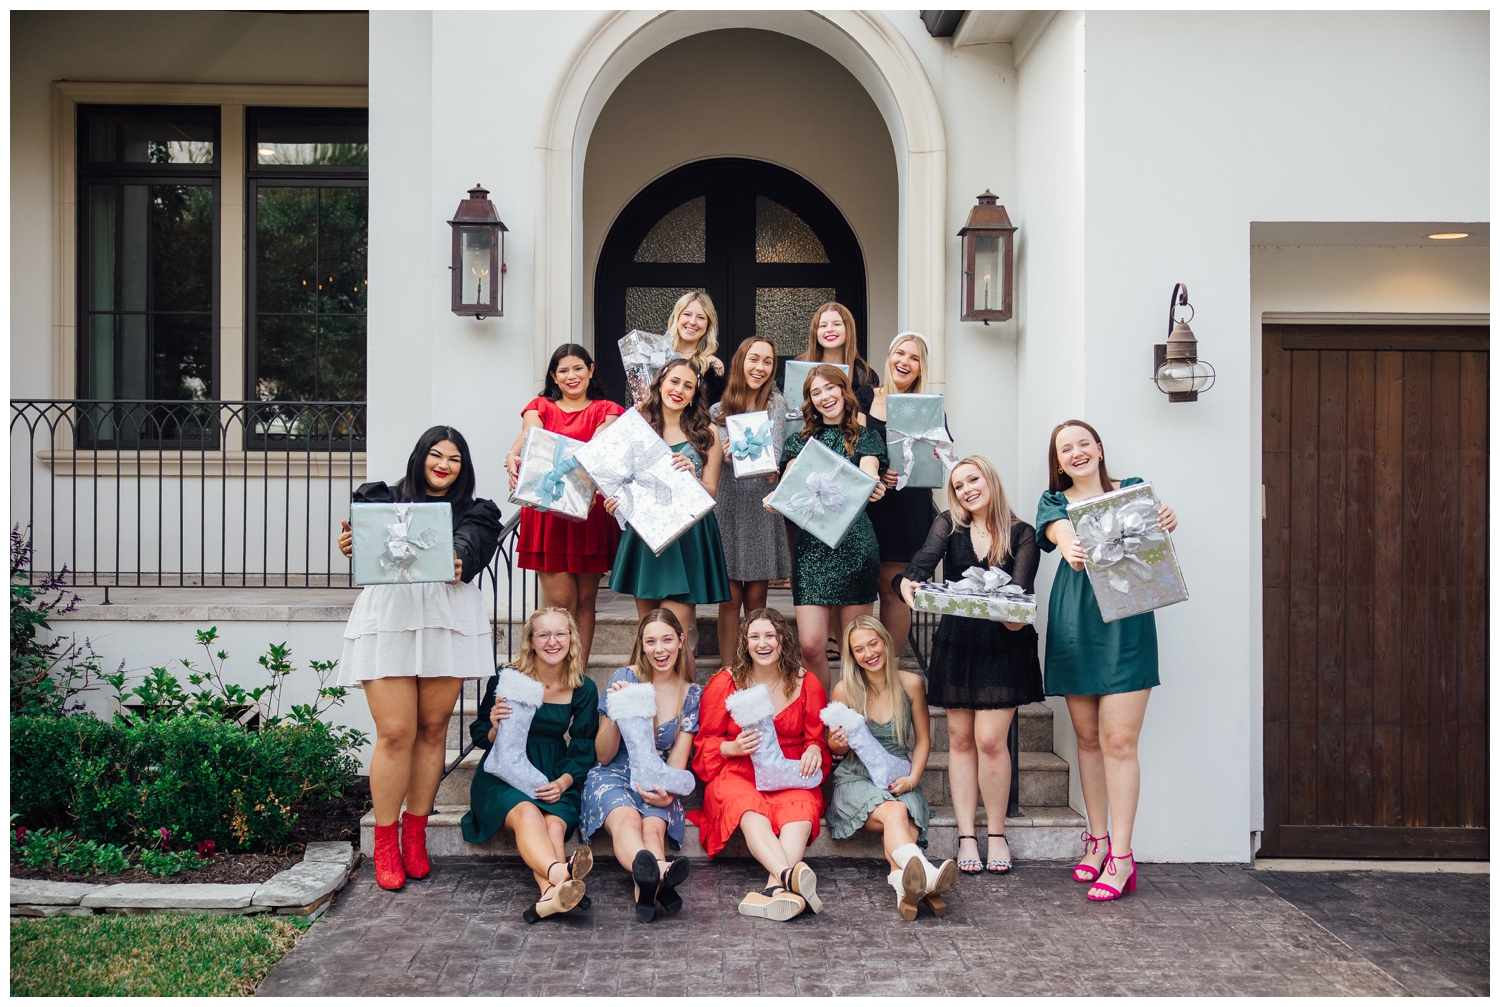 senior reps Christmas Photoshoot Houston with group of girls in dresses holding stockings and presents